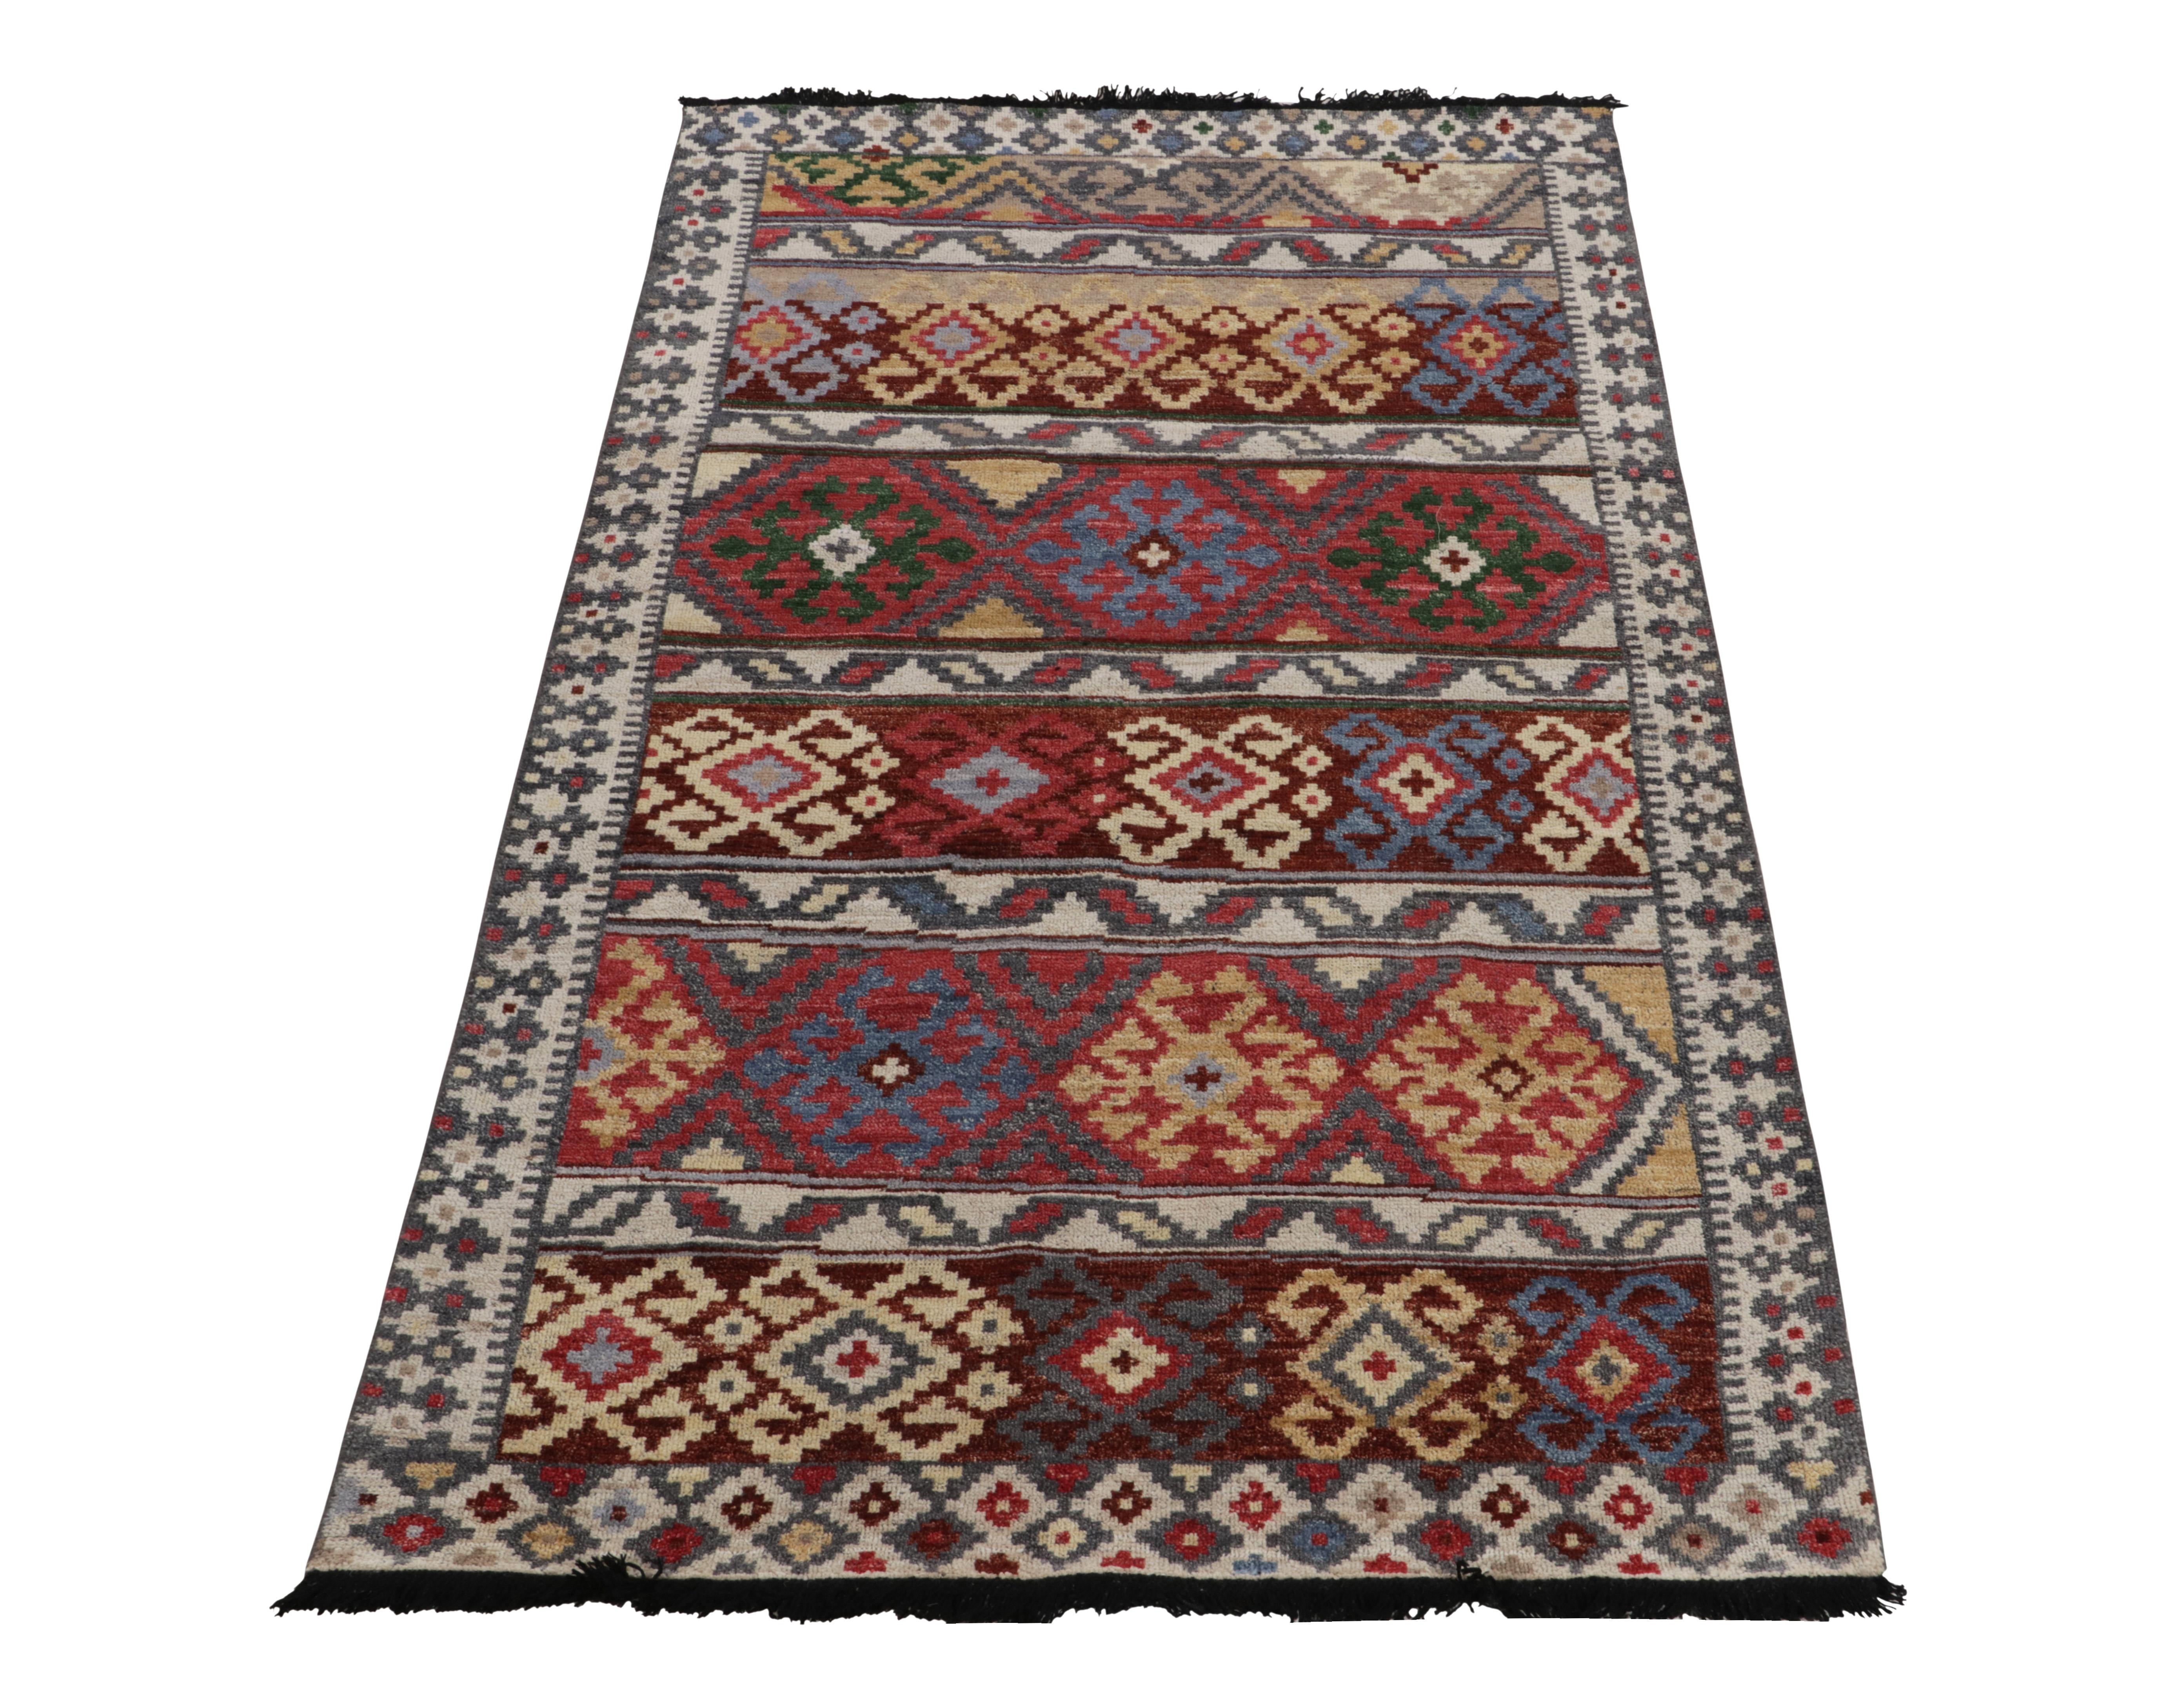 Hand-knotted in wool, a 4x7 ode to classic rugs inspired from Turkish tribal aesthetics—from Rug & Kilim’s contemporary Burano Collection. The carpet draws on mid century Anatolian kilim designs adapted to a soft pile texture, with well defined